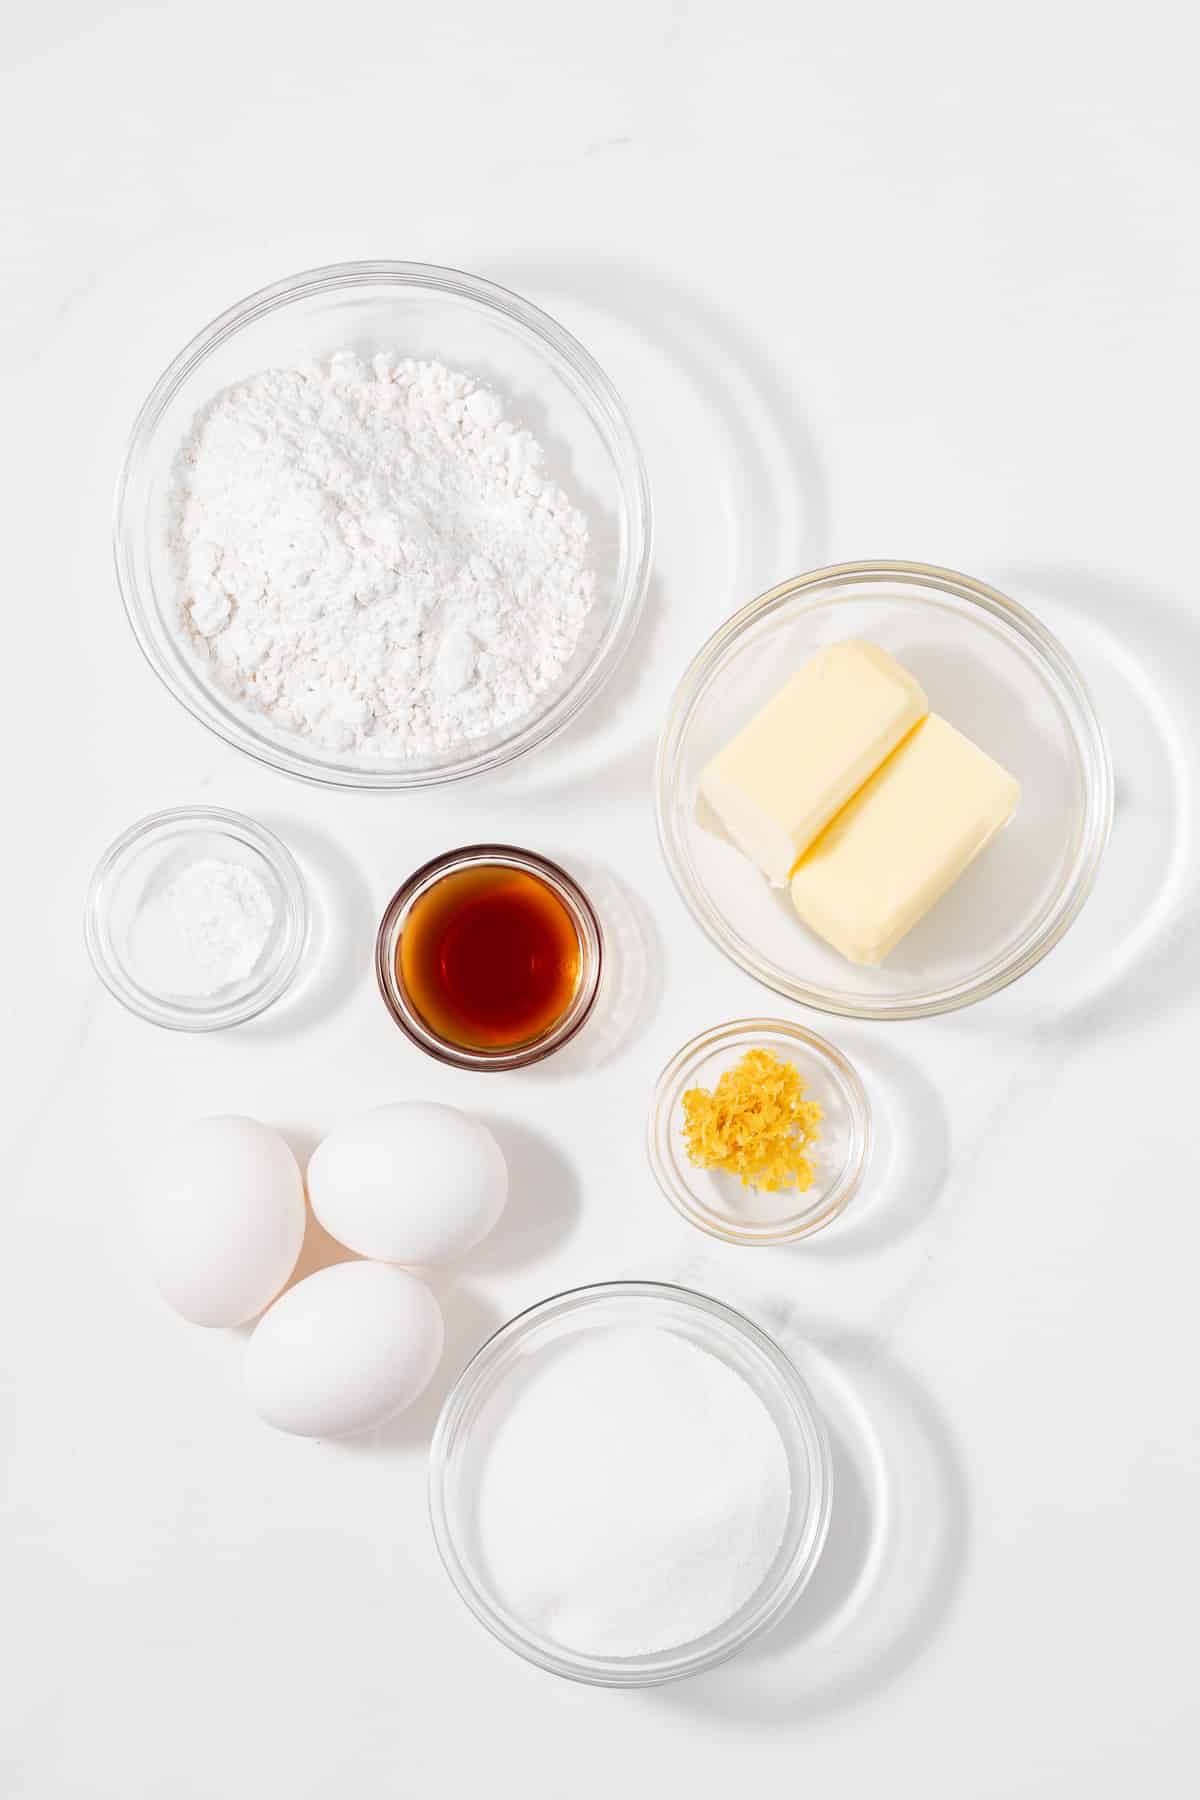 Ingredients for making Madeleines.